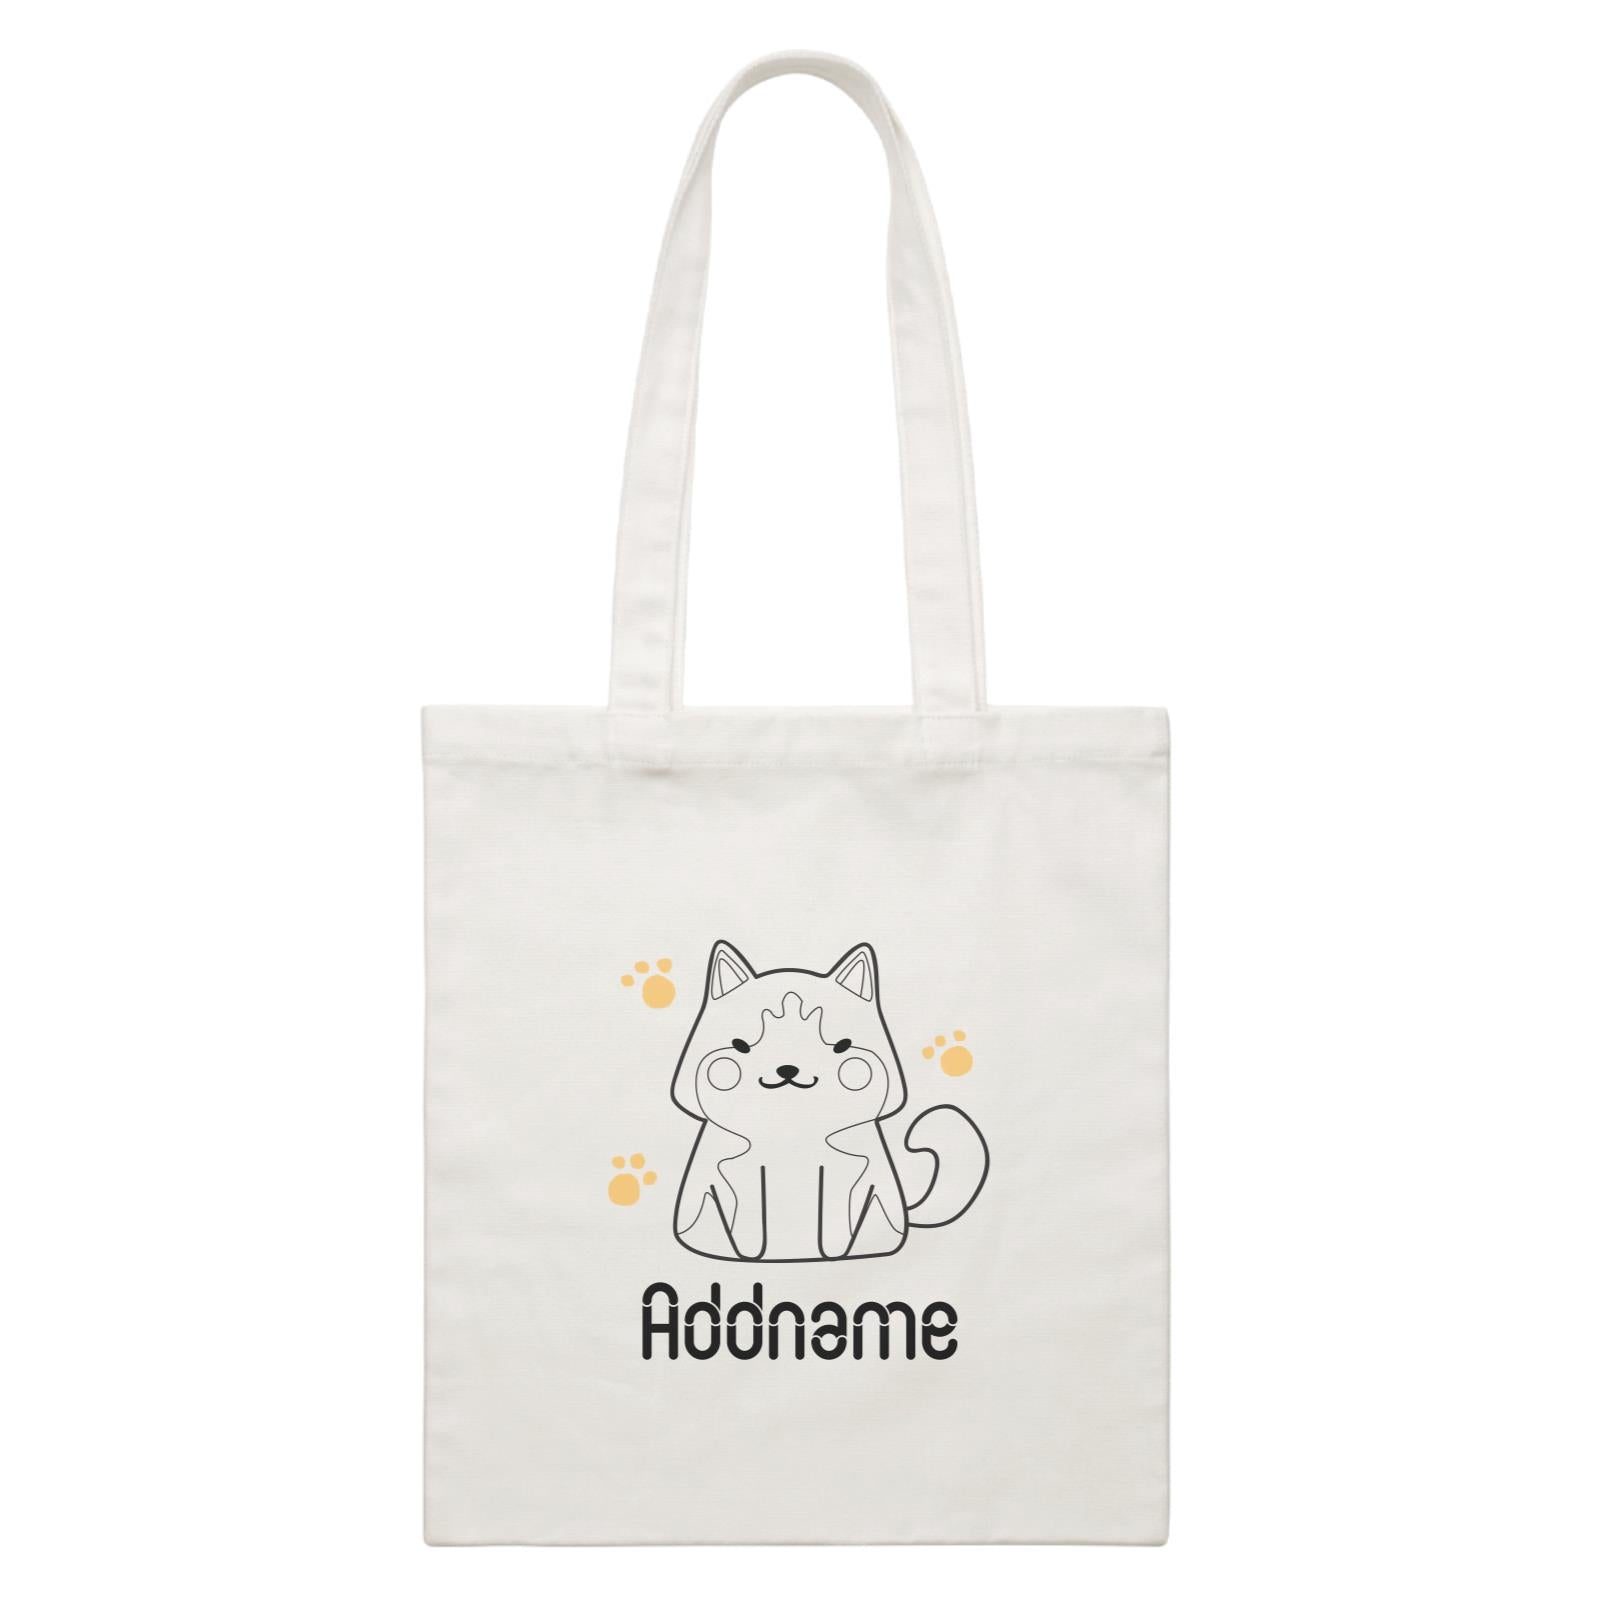 Coloring Outline Cute Hand Drawn Animals Dogs Husky Addnam White White Canvas Bag